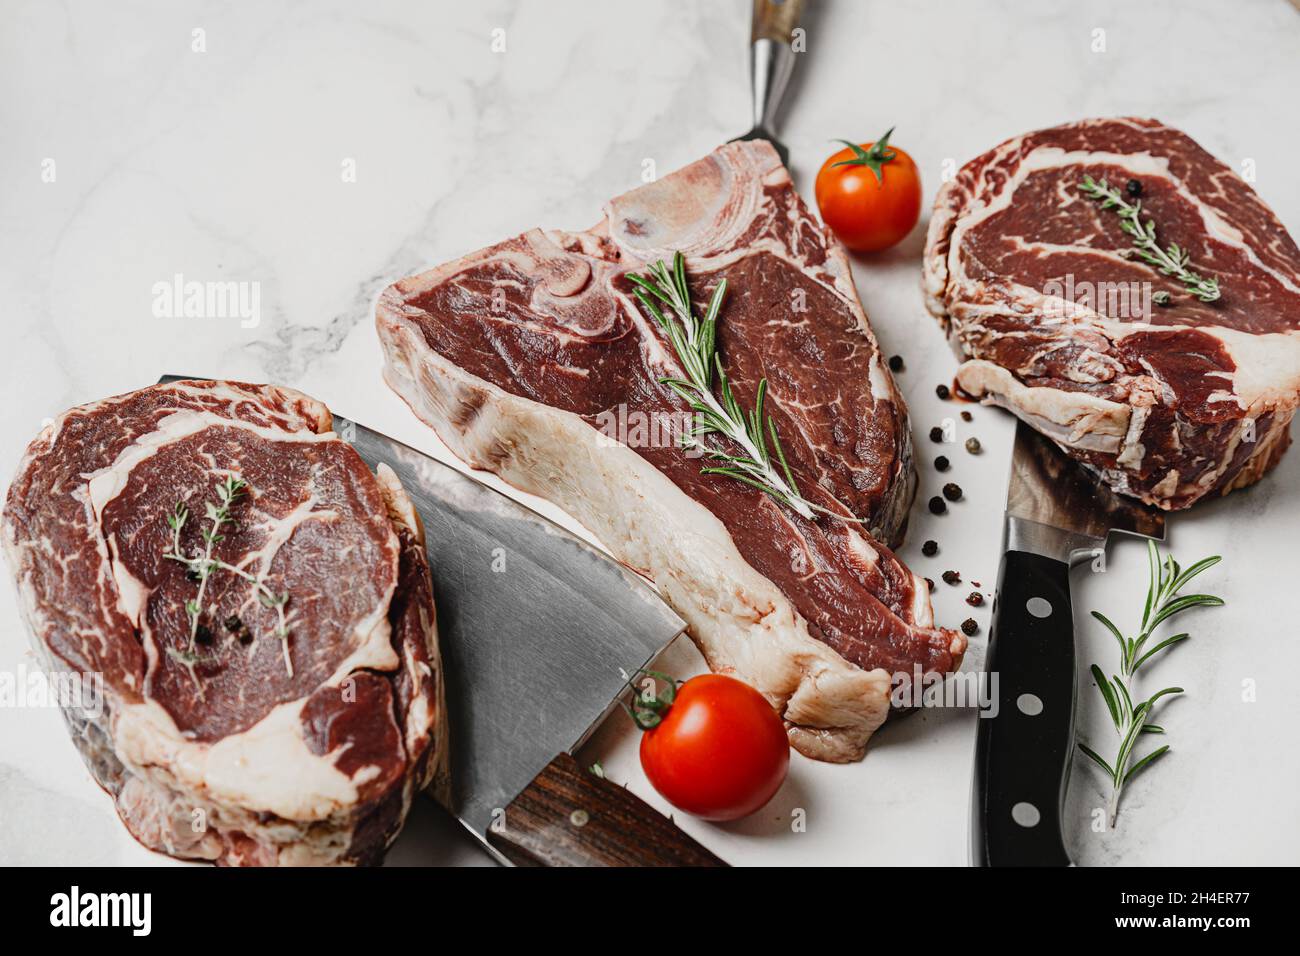 aged black angus beef steak ready to roast and serve. Stock Photo